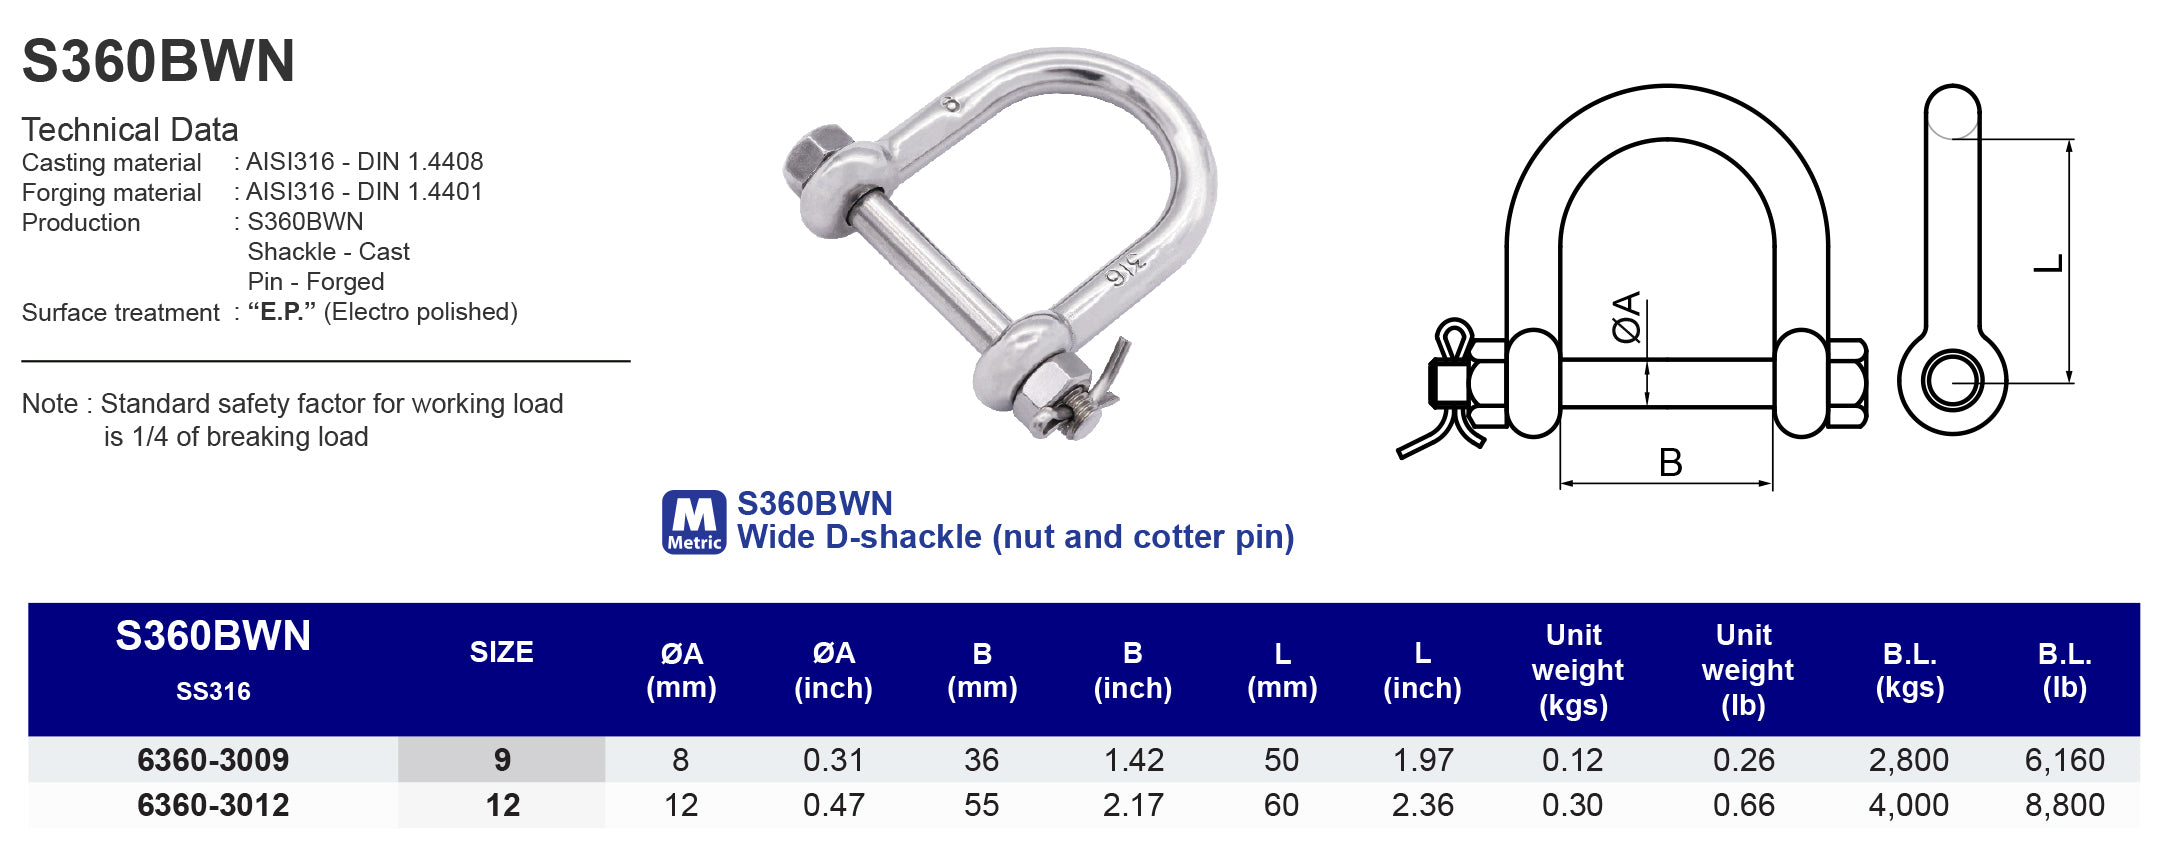 S360BWN Wide D-shackle (nut and cotter pin) - 316